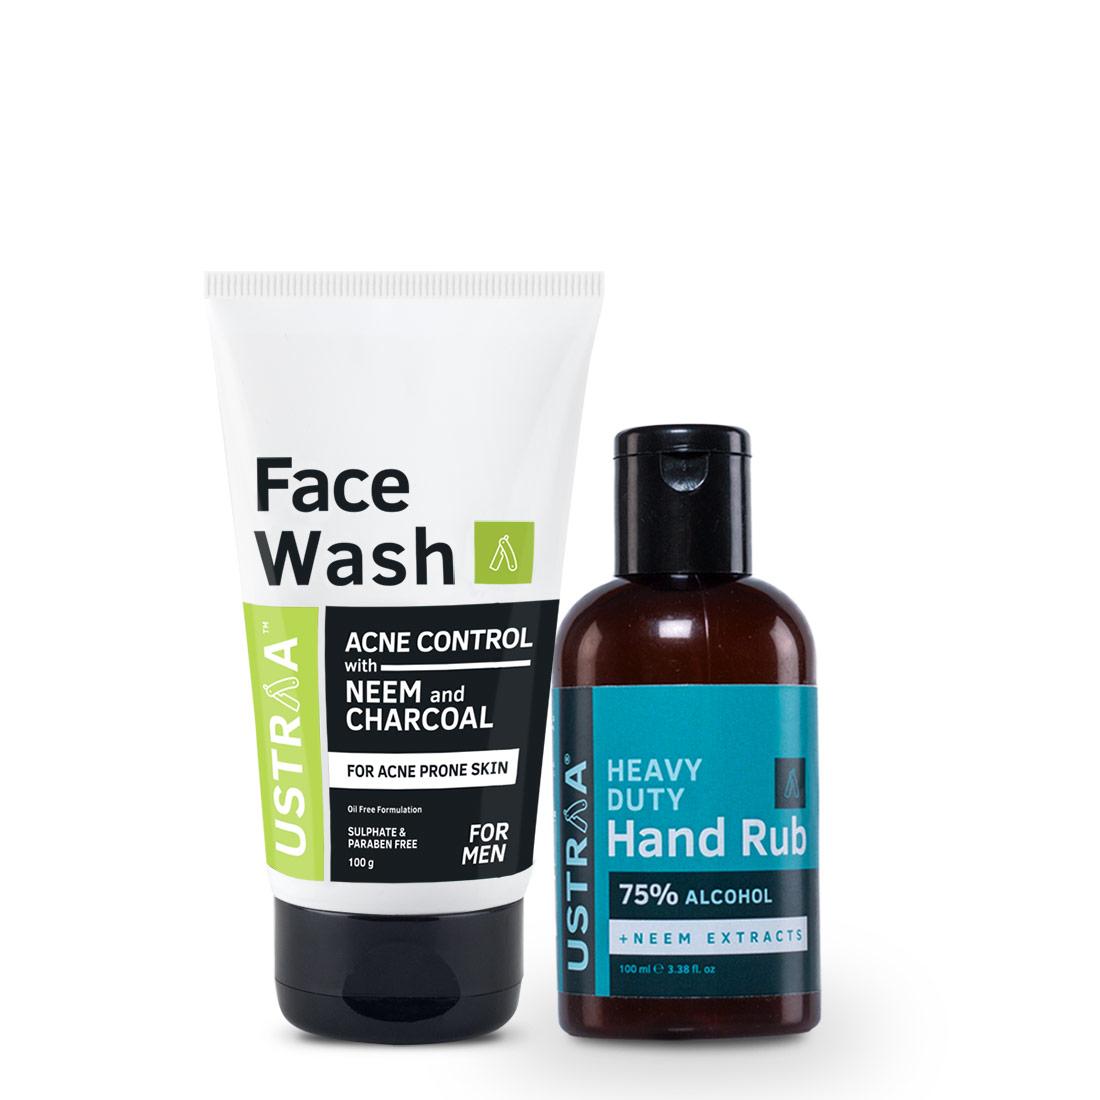 Face Wash - Neem & Charcoal and Hand Rub